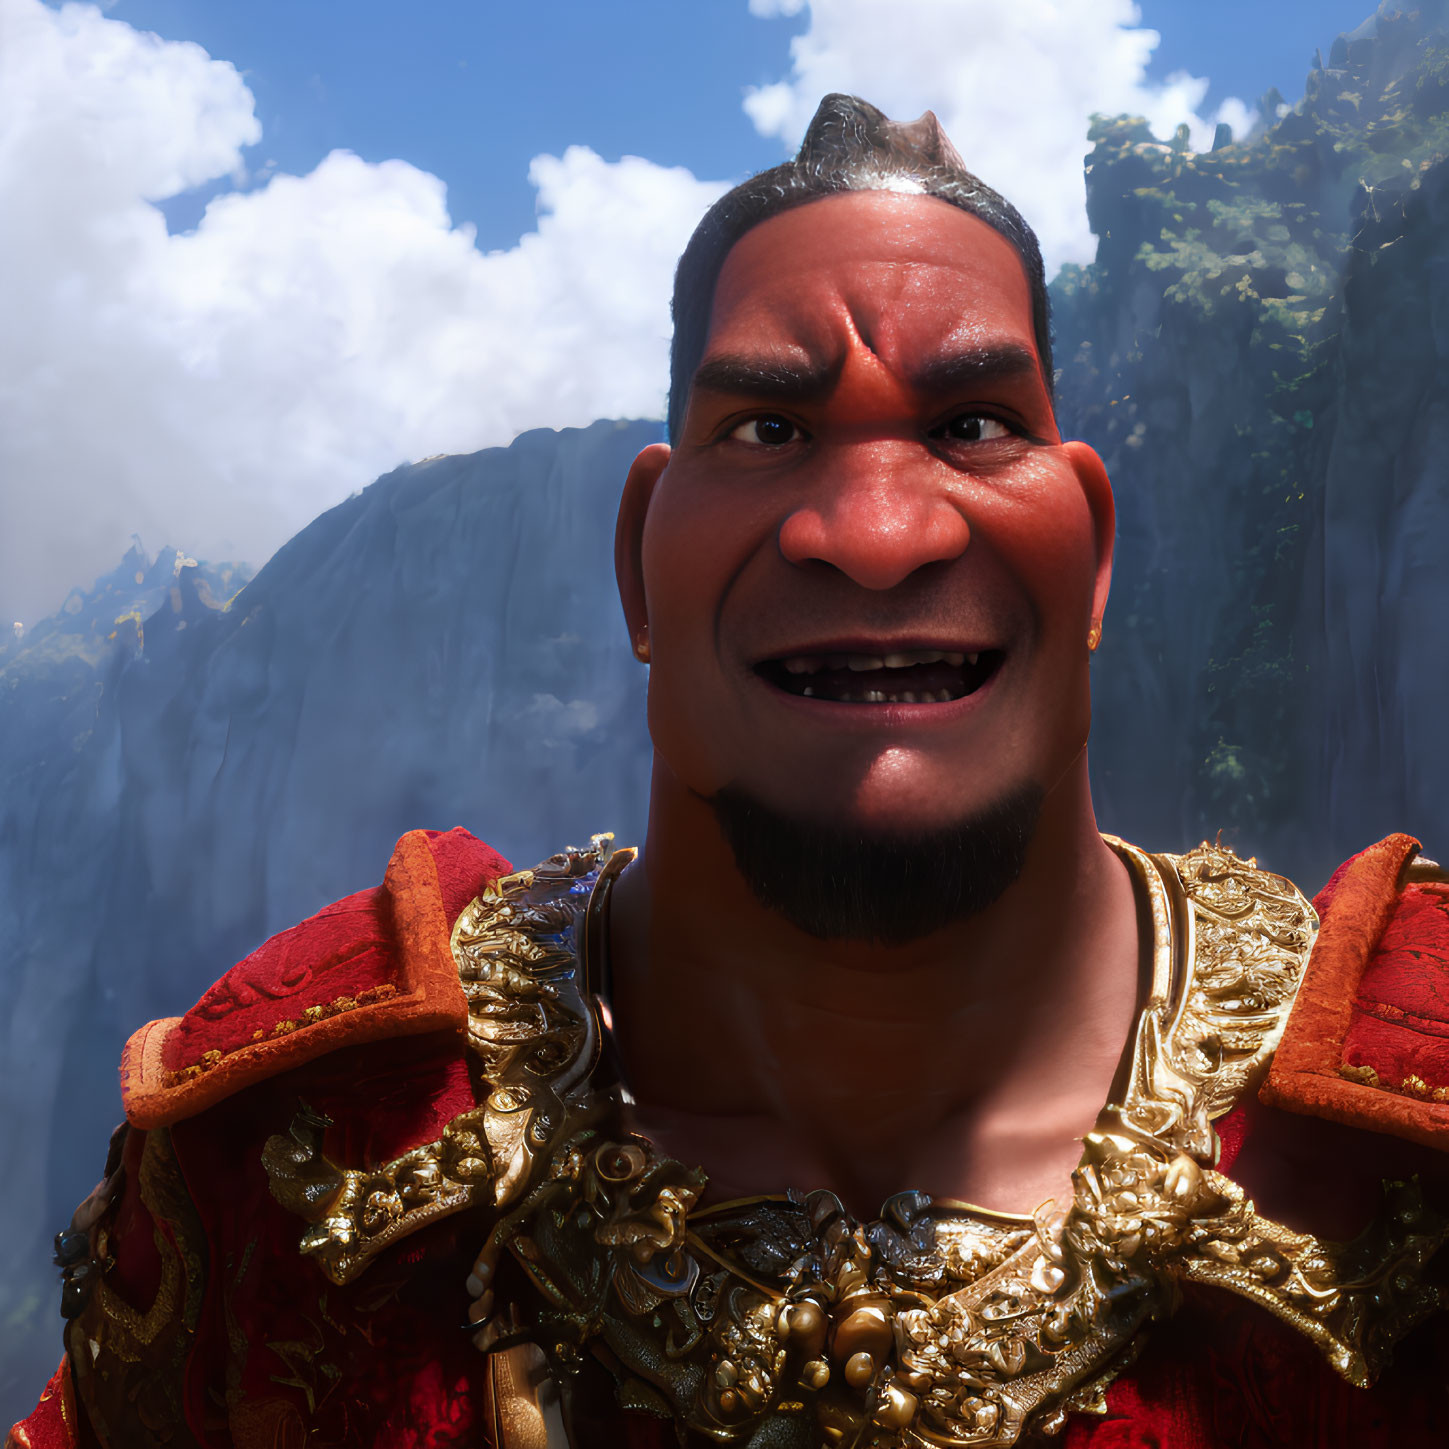 Muscular 3D Animated Character in Red and Gold Outfit with Mountain Backdrop